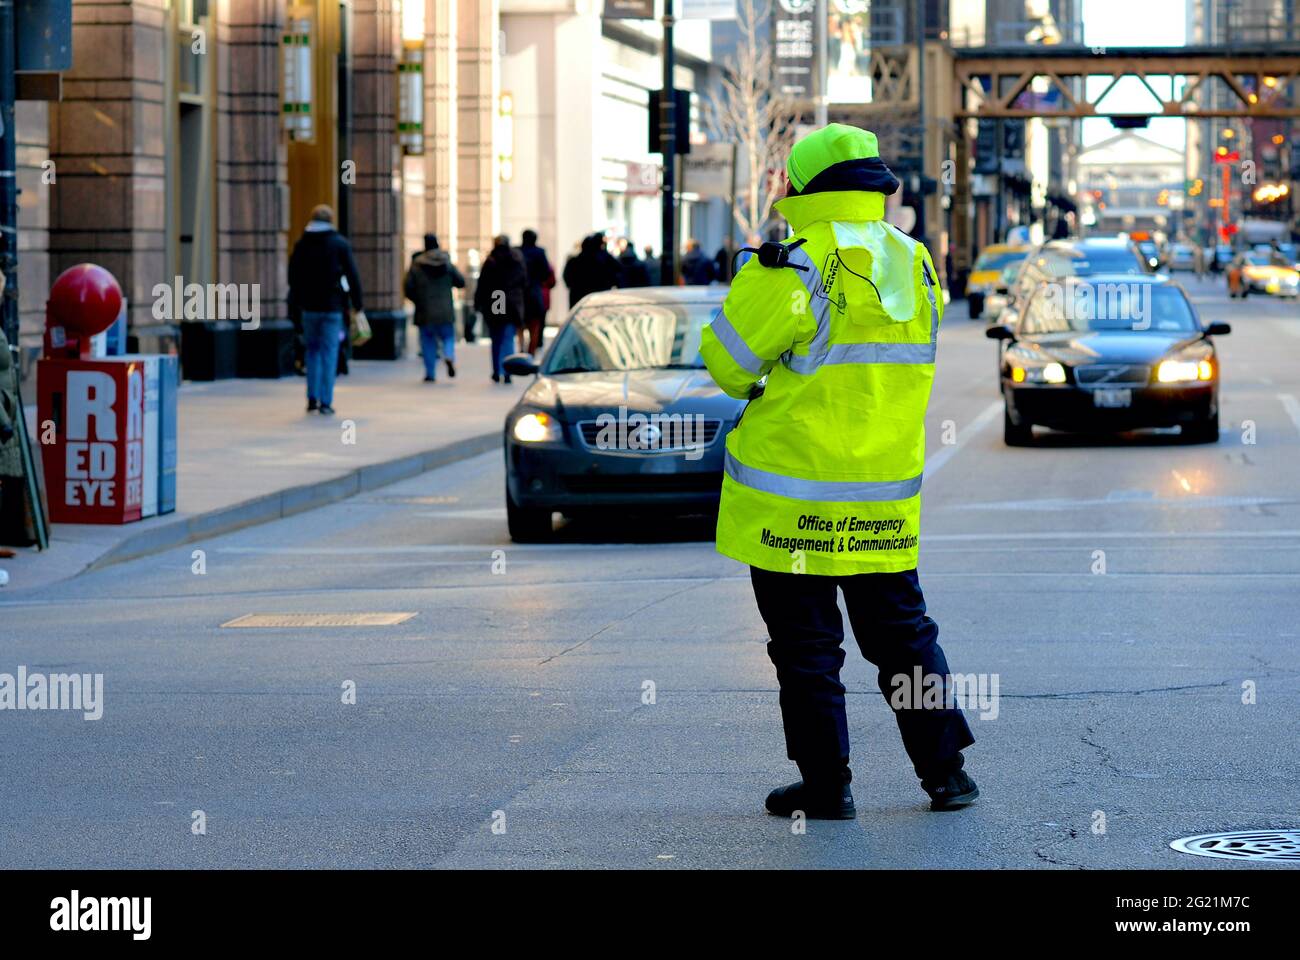 A City of Chicago Office of Emergency Management and Communications worker observes traffic on a busy downtown street in Chicago, Illinois, USA. Stock Photo